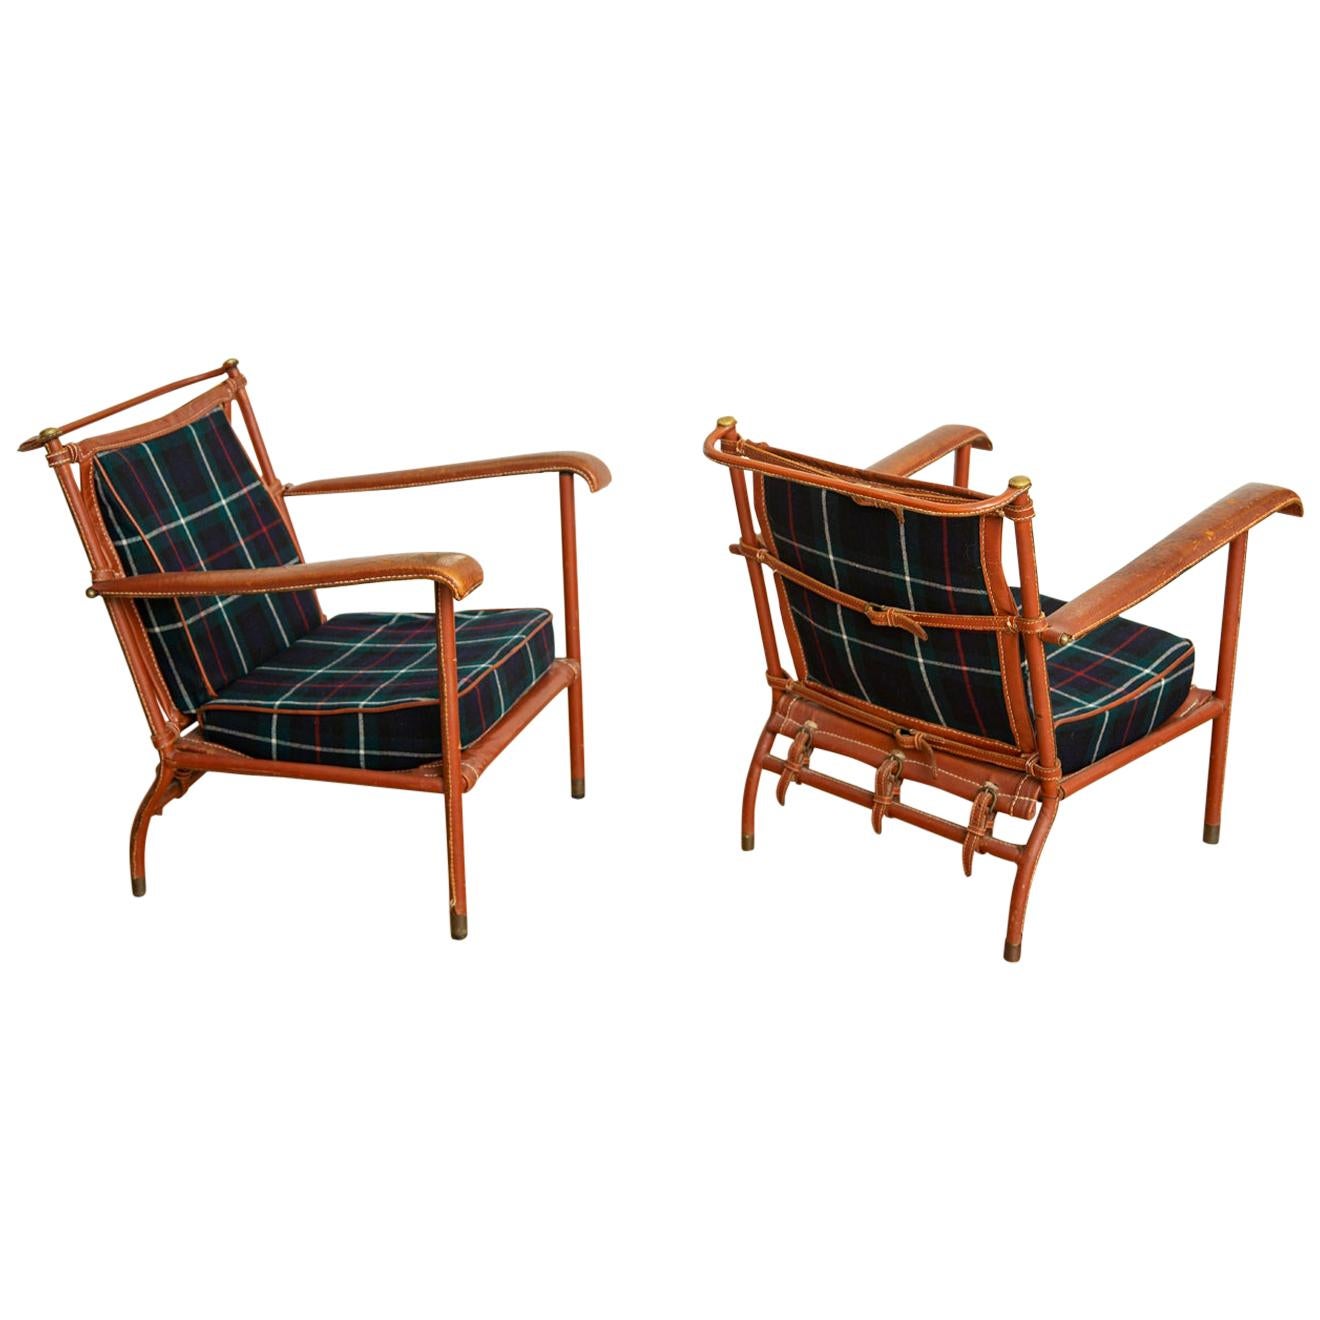 Pair of Jacques Adnet Lounge Chairs